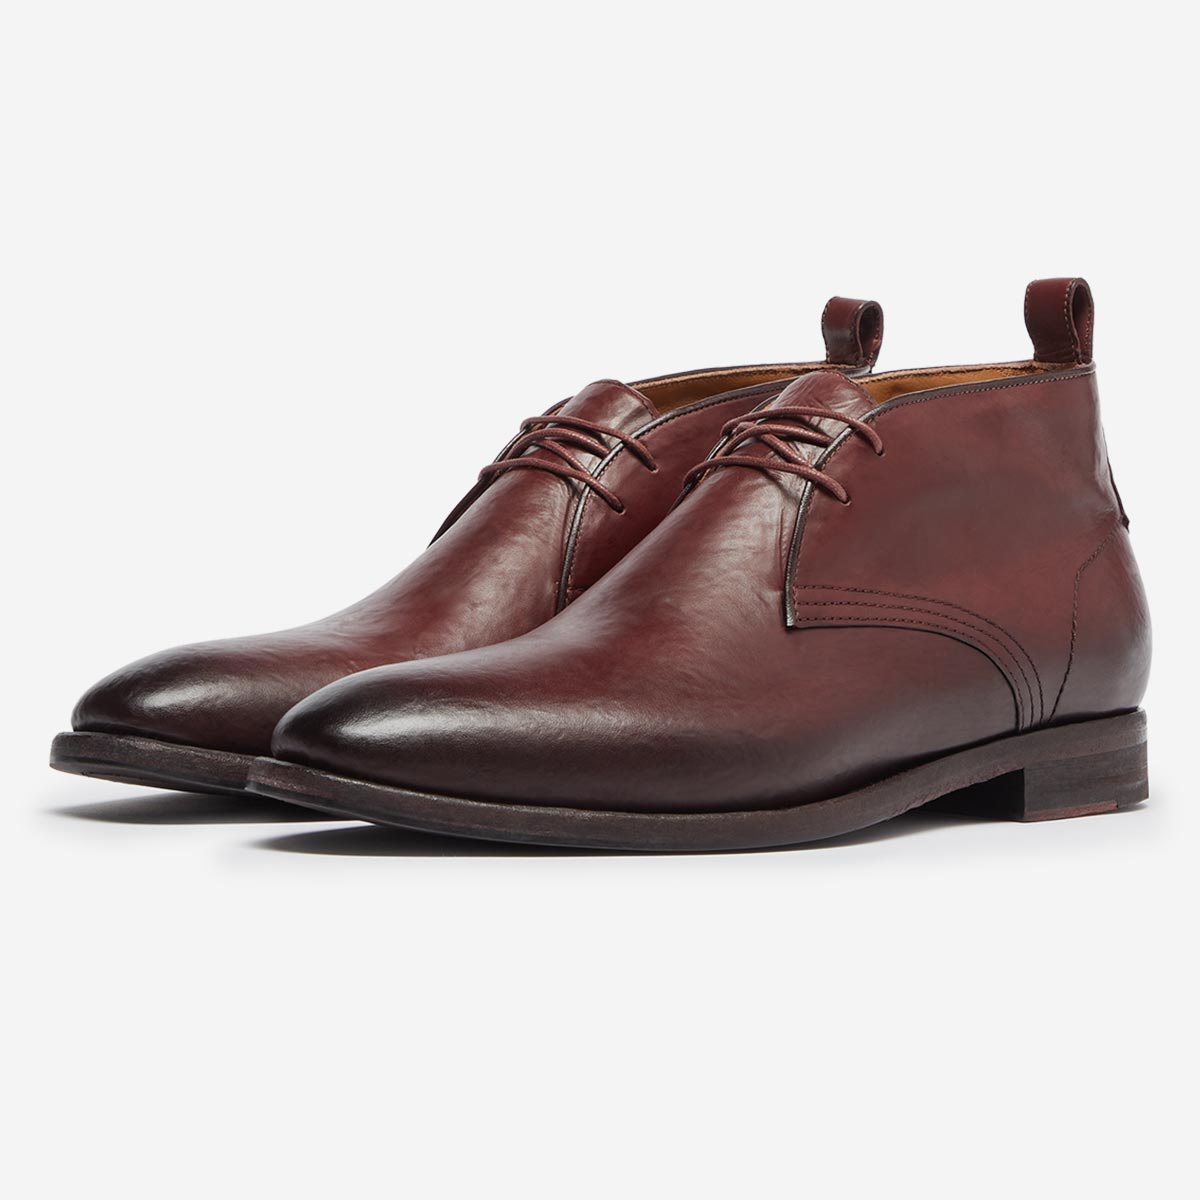 Acconia Burgundy Chukka Boots | Men's Boots | Oliver Sweeney